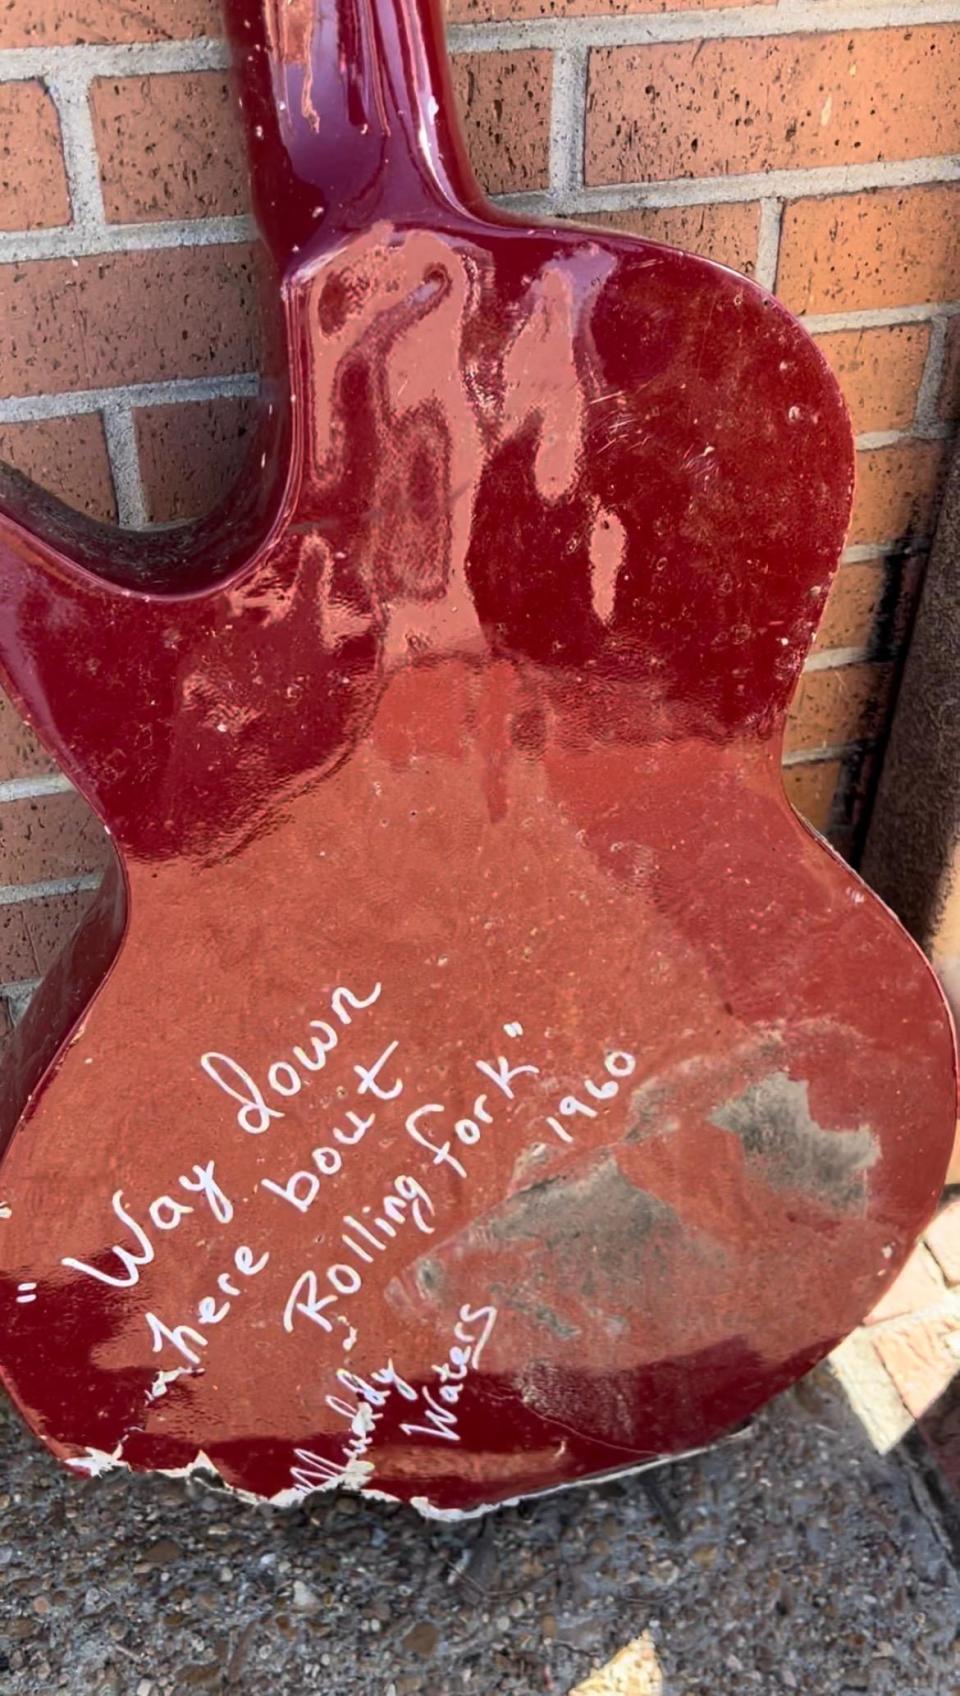 Muddy Waters considered Rolling Fork his home. A guitar sculpture bearing his autograph was discovered after the storm.